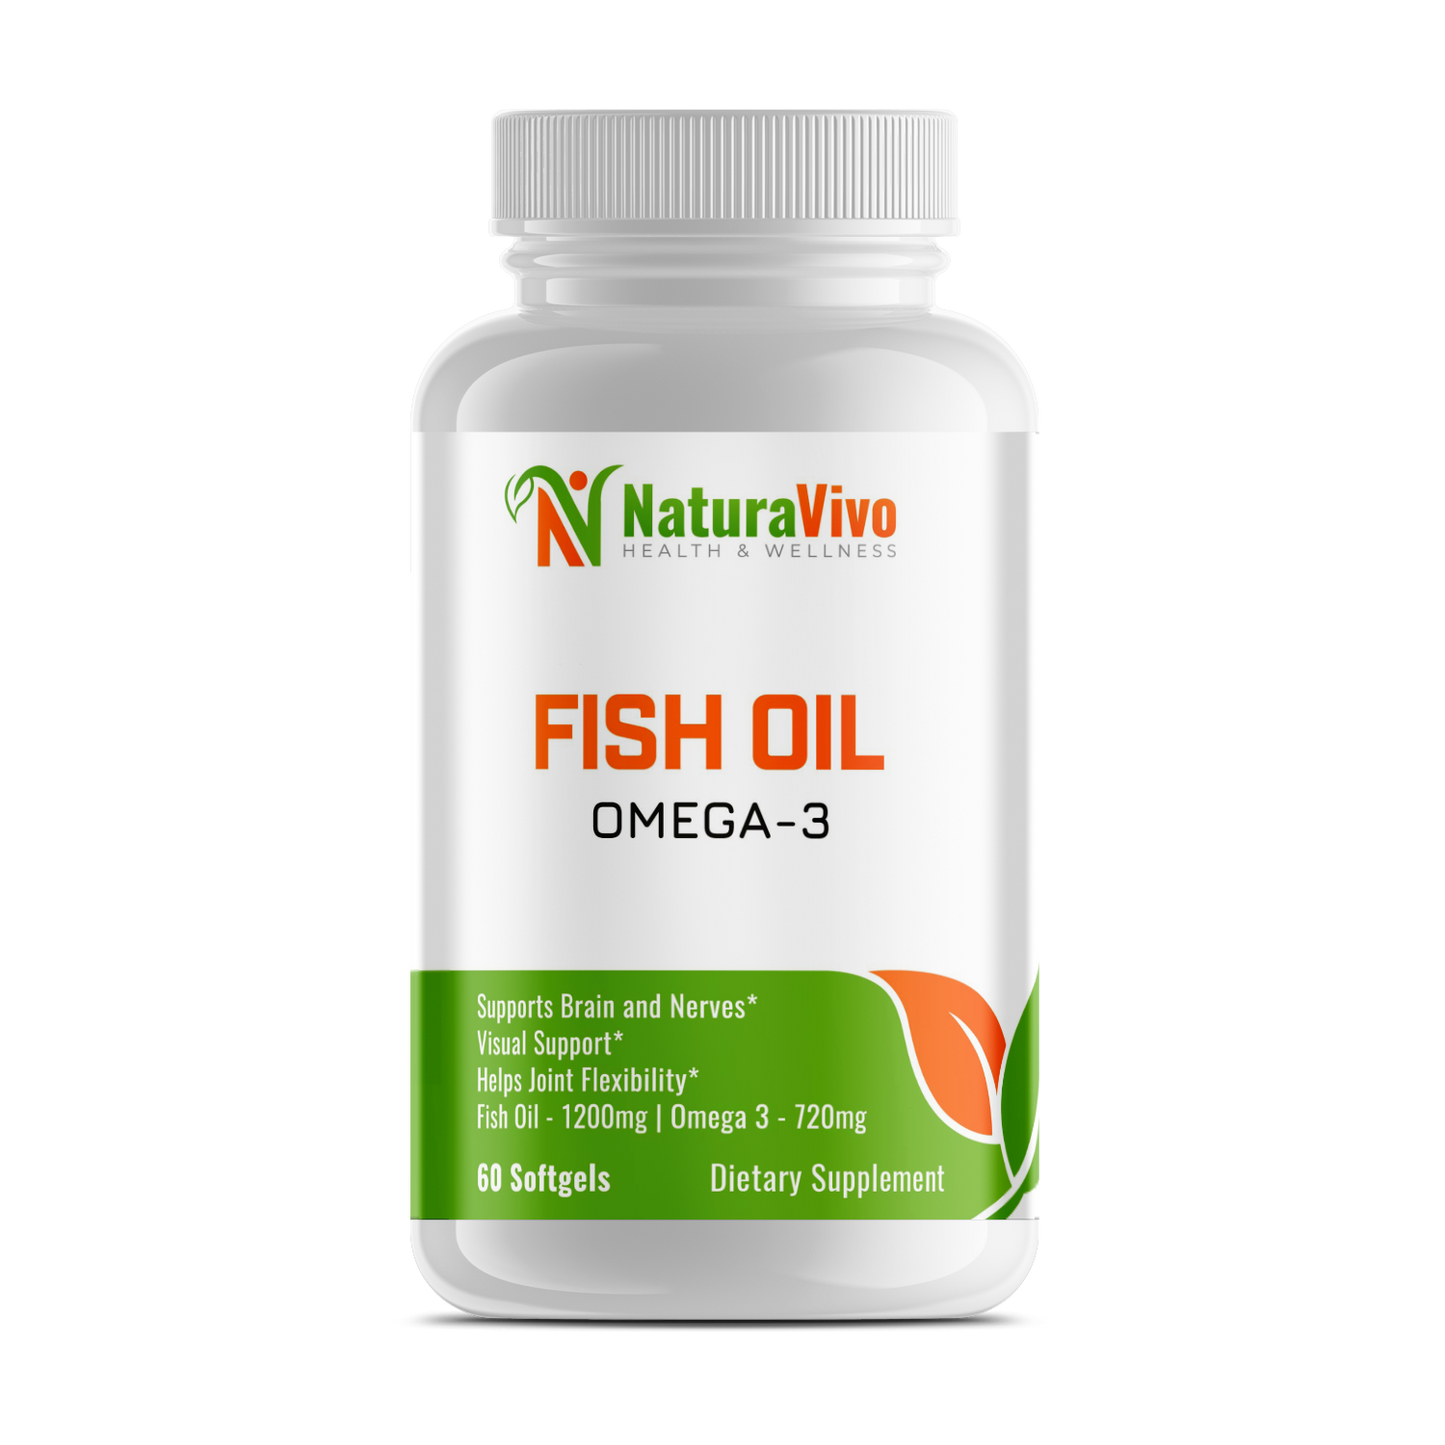 Fish Oil (1200 mg) Omega-3 (720 mg) Supplement - High EPA & DHA for Joint Flexibility, Heart, Brain & Vision Support - 100% Pure Sea-Harvested